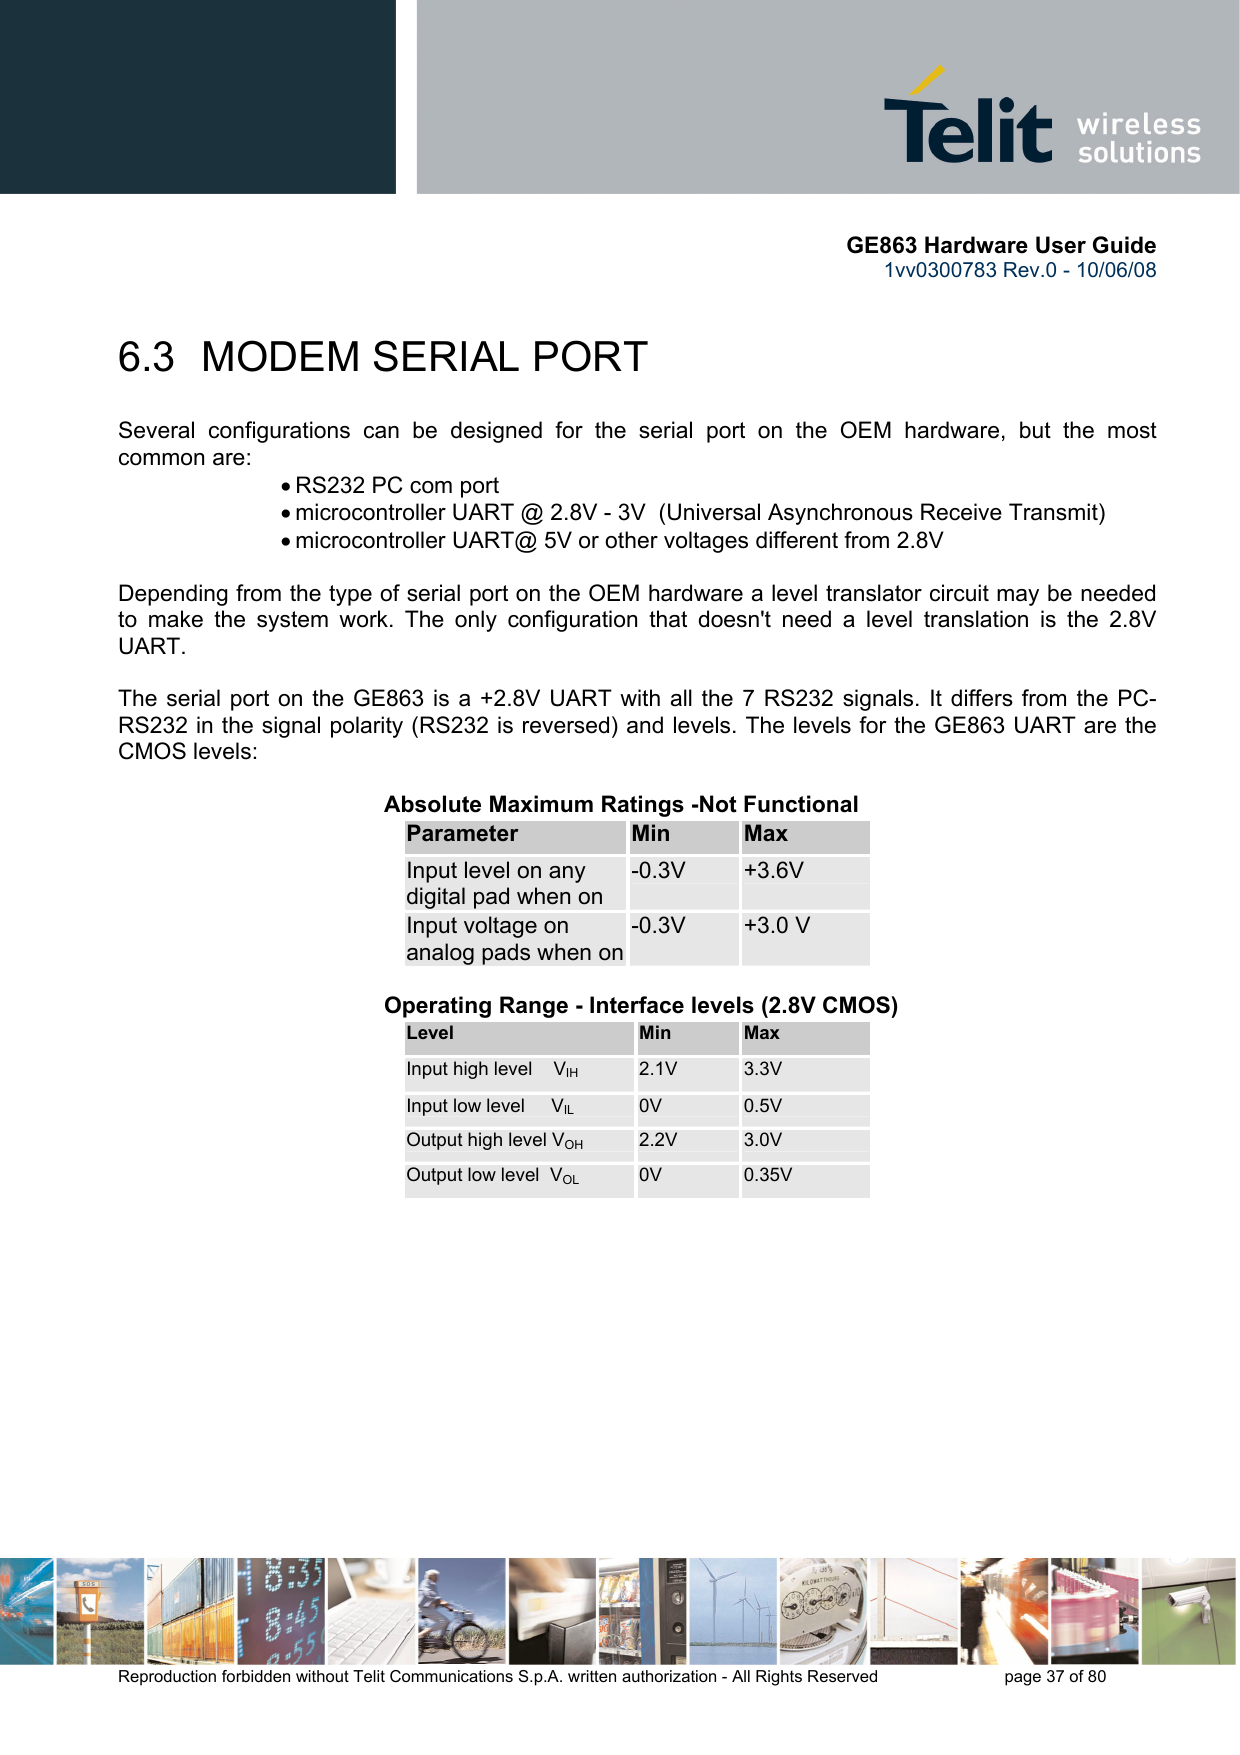       GE863 Hardware User Guide 1vv0300783 Rev.0 - 10/06/08 Reproduction forbidden without Telit Communications S.p.A. written authorization - All Rights Reserved    page 37 of 80  6.3 MODEM SERIAL PORT Several configurations can be designed for the serial port on the OEM hardware, but the most common are: • RS232 PC com port • microcontroller UART @ 2.8V - 3V  (Universal Asynchronous Receive Transmit)  • microcontroller UART@ 5V or other voltages different from 2.8V   Depending from the type of serial port on the OEM hardware a level translator circuit may be needed to make the system work. The only configuration that doesn&apos;t need a level translation is the 2.8V UART.  The serial port on the GE863 is a +2.8V UART with all the 7 RS232 signals. It differs from the PC-RS232 in the signal polarity (RS232 is reversed) and levels. The levels for the GE863 UART are the CMOS levels:     Absolute Maximum Ratings -Not Functional Parameter  Min  Max Input level on any digital pad when on -0.3V  +3.6V Input voltage on analog pads when on-0.3V  +3.0 V     Operating Range - Interface levels (2.8V CMOS) Level  Min  Max Input high level    VIH  2.1V  3.3V Input low level     VIL 0V  0.5V Output high level VOH 2.2V  3.0V Output low level  VOL 0V  0.35V  